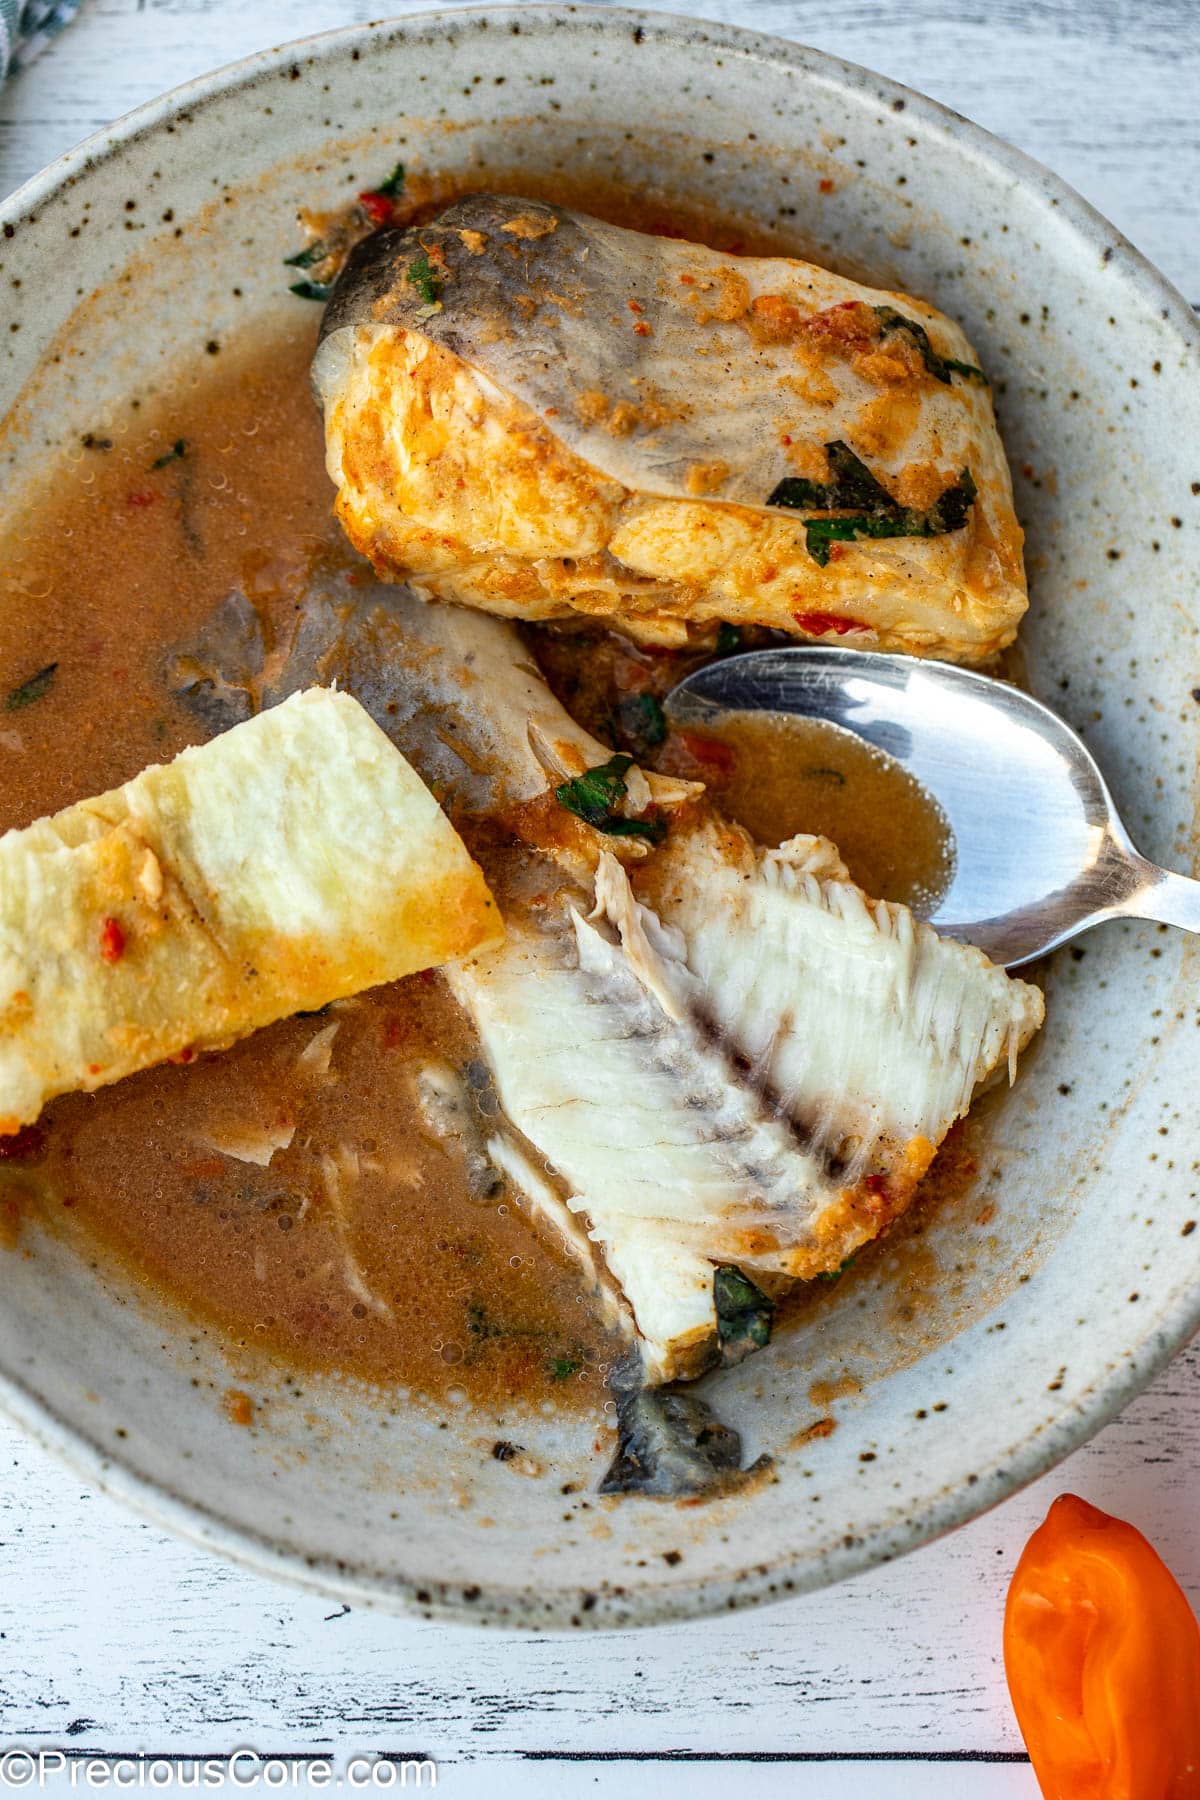 Fish tail in a broth served with African white yam.